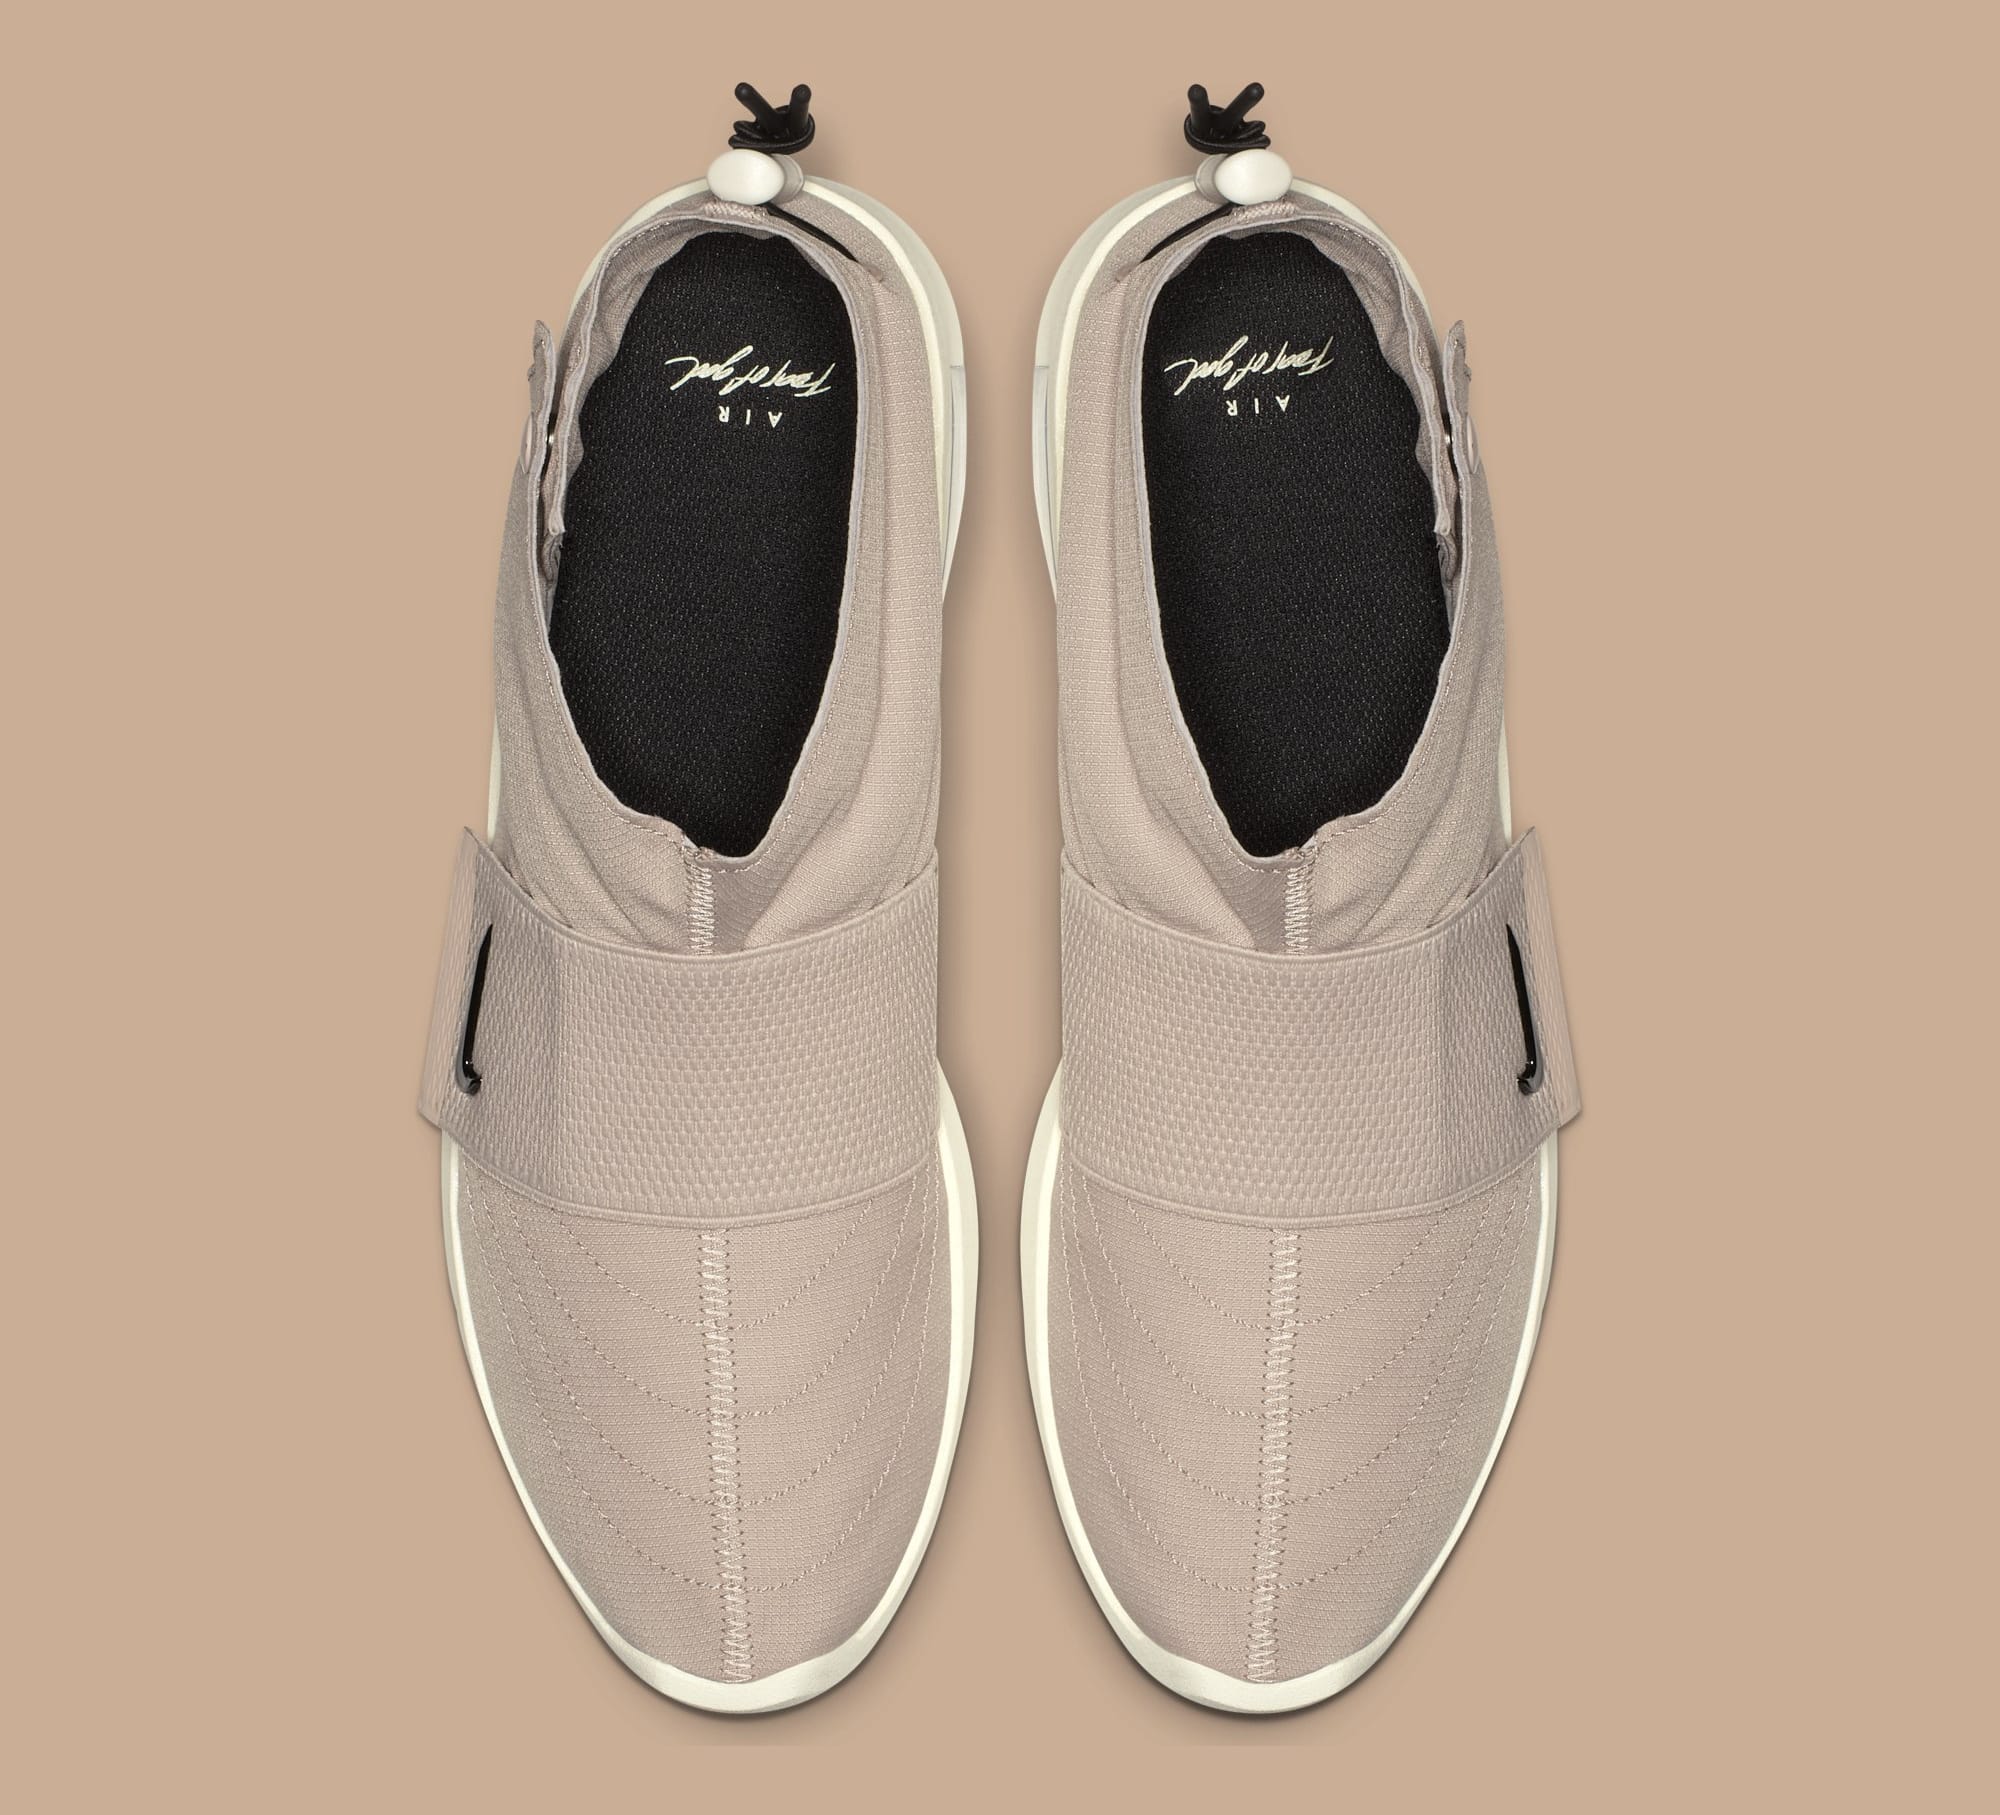 Fear of God x Nike Moccasin AT8086-200 (Top)